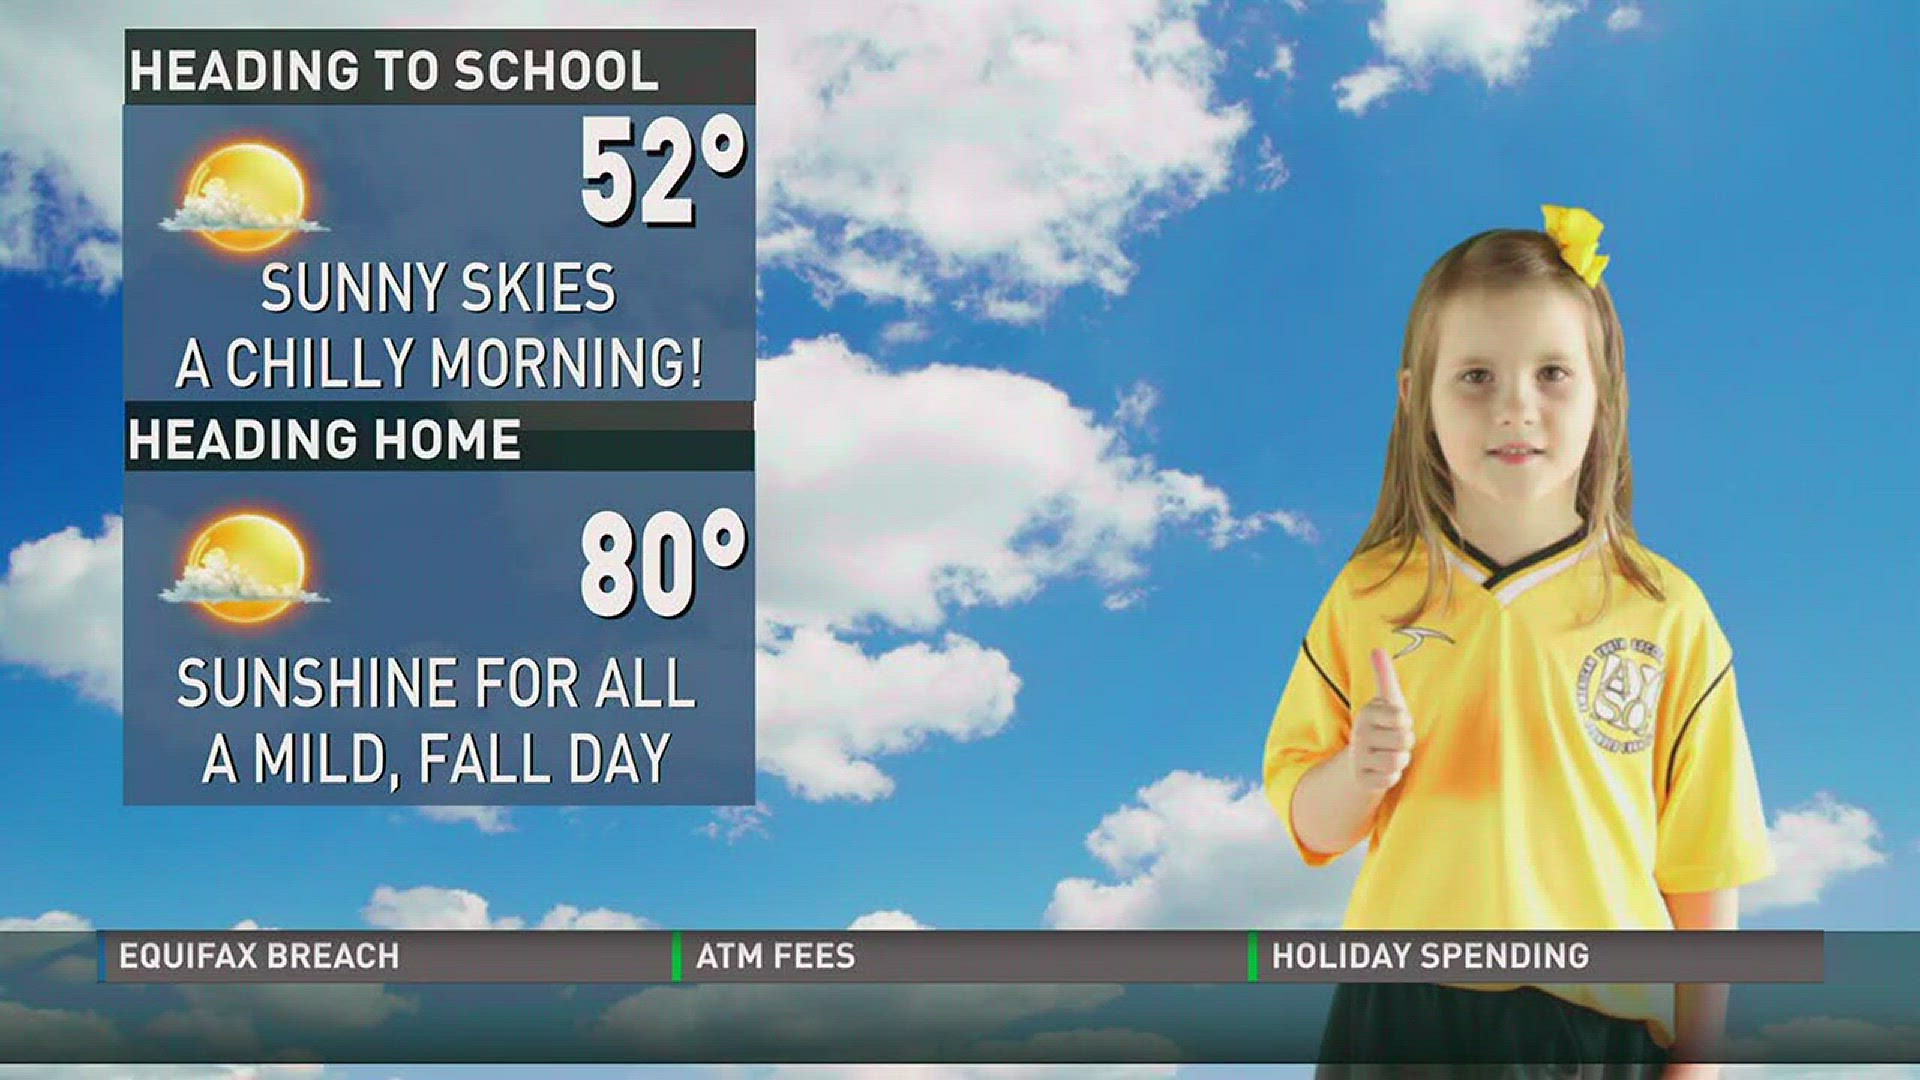 On Wednesday, from 5-7 p.m., you are invited to join our weather team at Lakeshore Park's Hank Rappe Playgroundf or a bus stop weather photo shoot. We will video the kids and use that footage to help give the morning forecast on 10News Today.